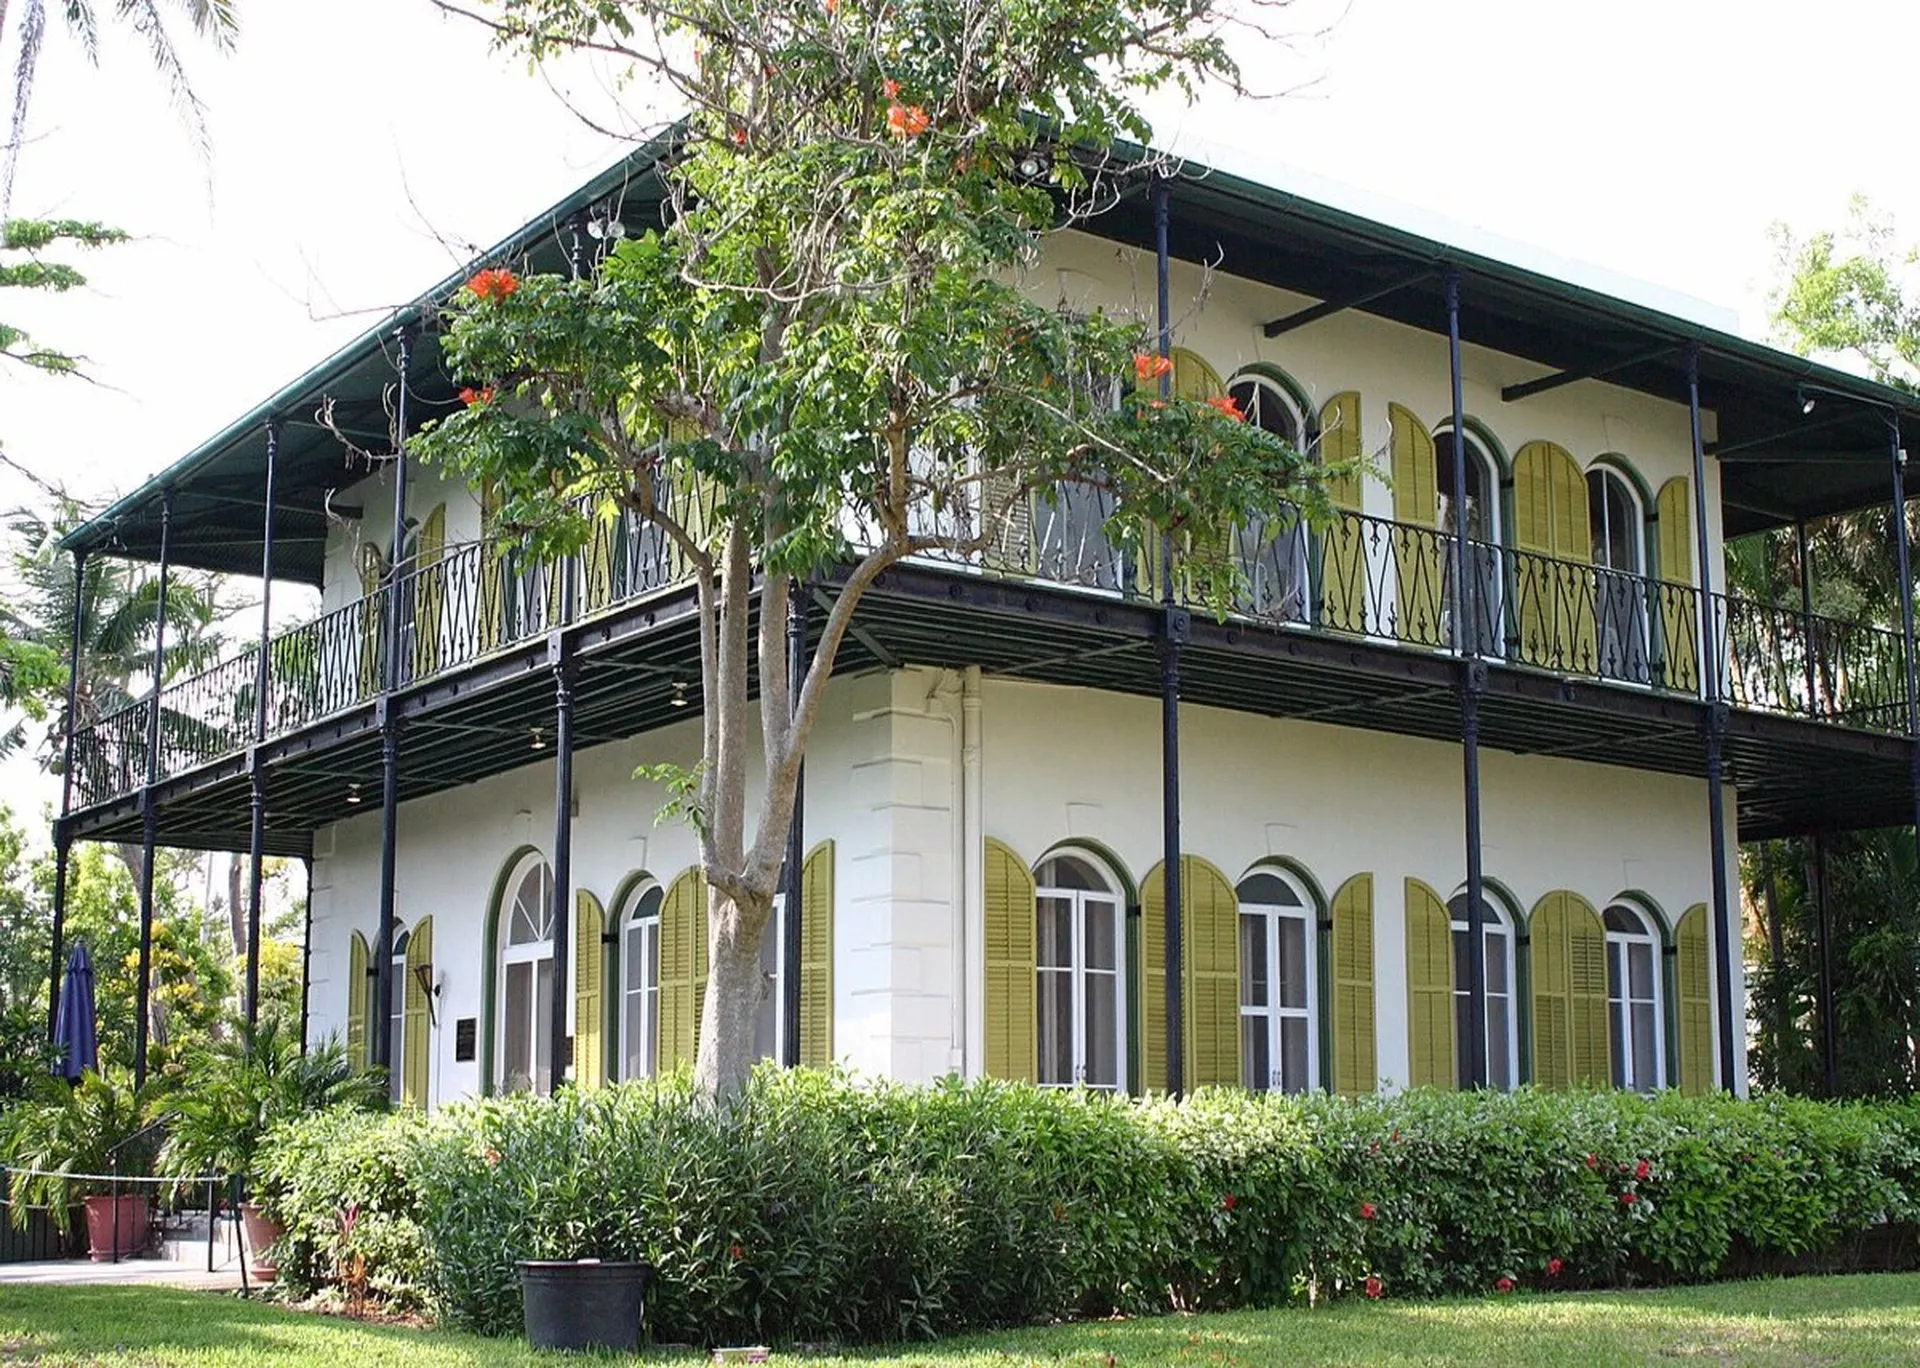 Explore The Ernest Hemingway Home and Museum 